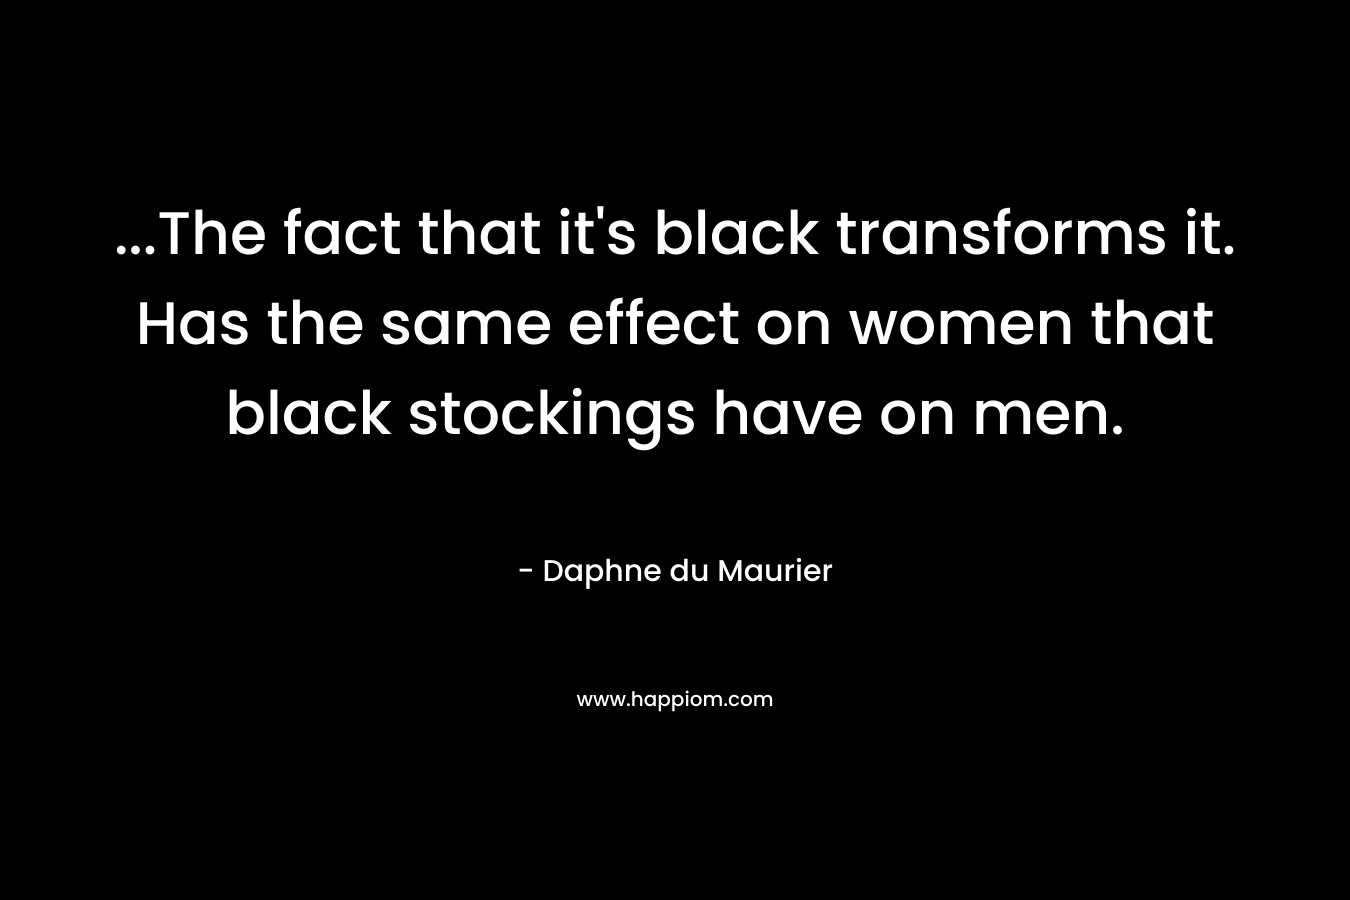 ...The fact that it's black transforms it. Has the same effect on women that black stockings have on men.